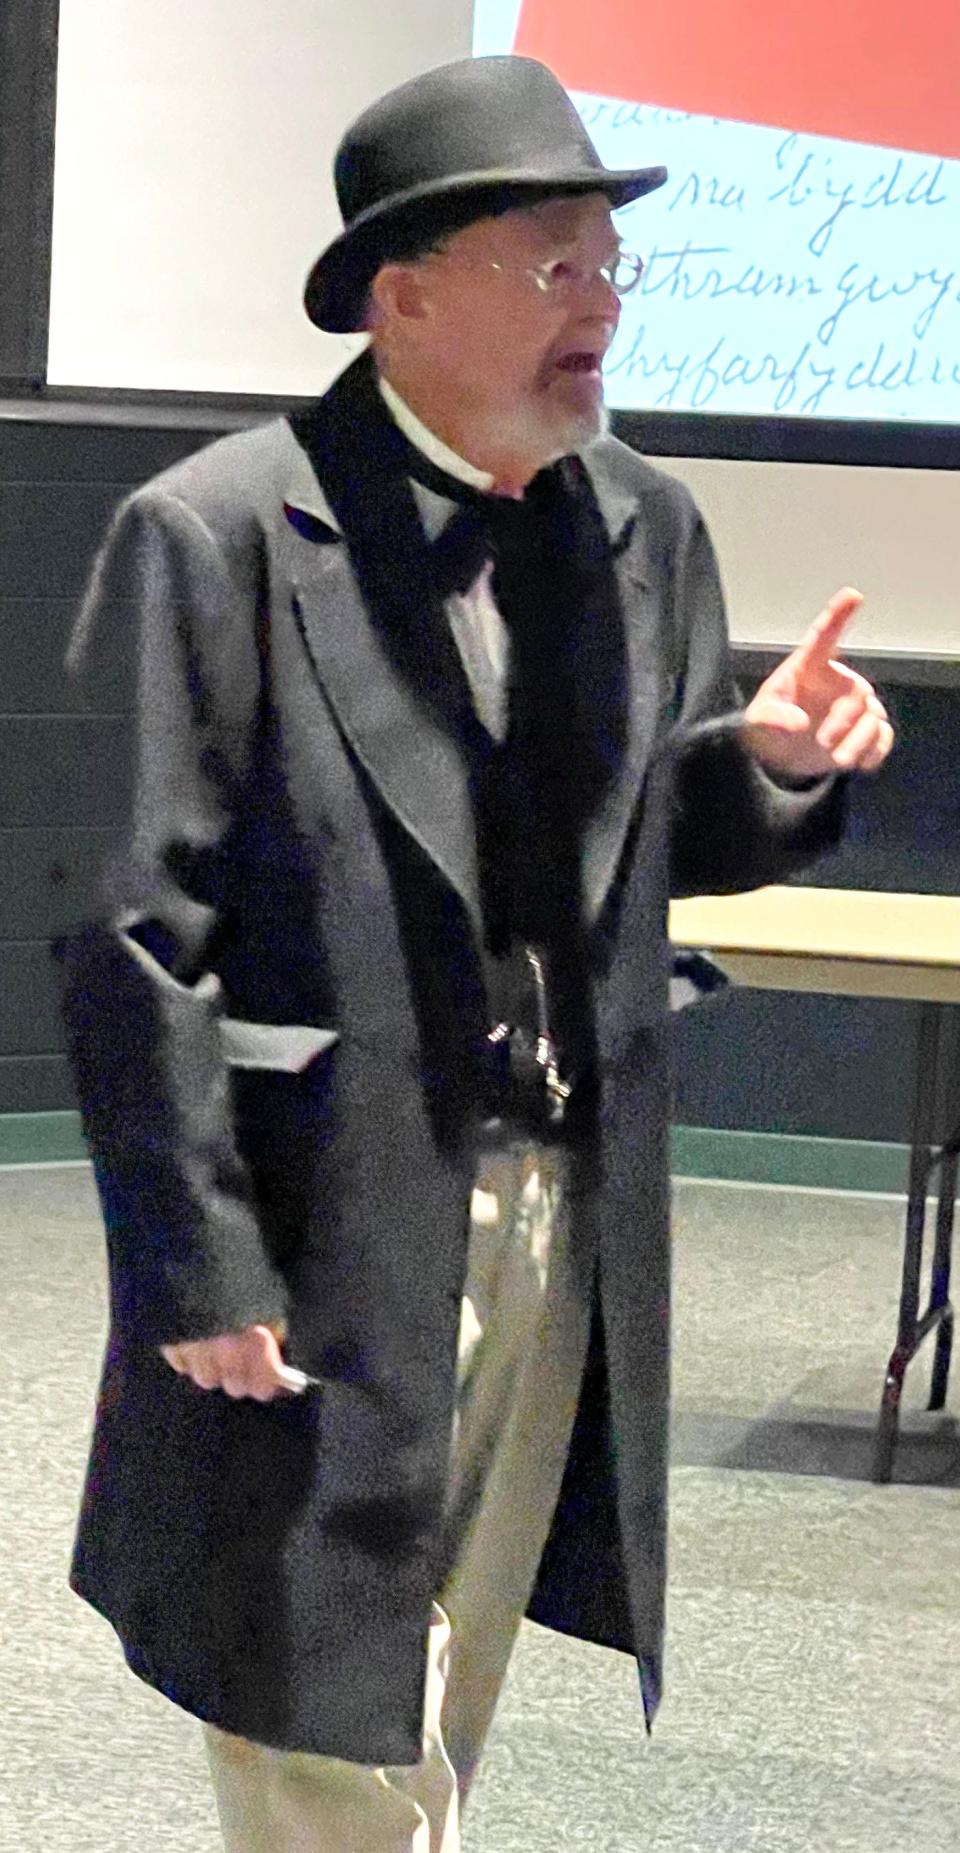 Barry Thacker delivers a lecture on “Bringing Coal Creek History to Life” at the Oak Ridge Branch Campus of Roane State Community College.